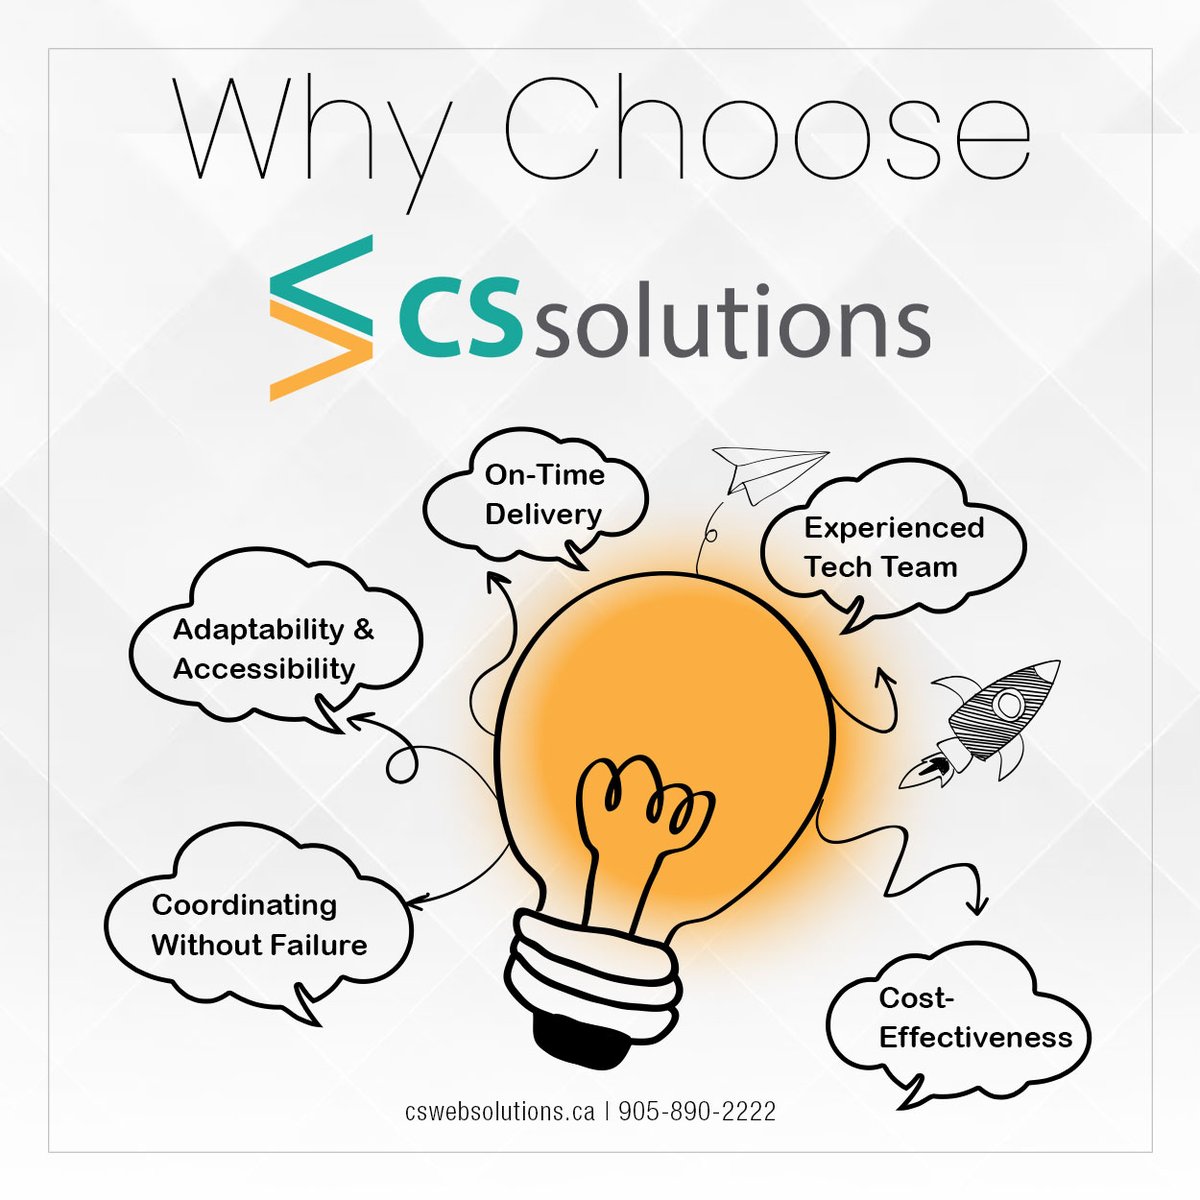 For years, we have helped small and big business clients with strategic web, digital, and creative solutions that are awesome & affordable. 

Call (905) 890-2222 or visit cswebsolutions.ca

#OnlineMarketing #DigitalMarketing #SearchEngineMarketing #SEO #BusinessLeads